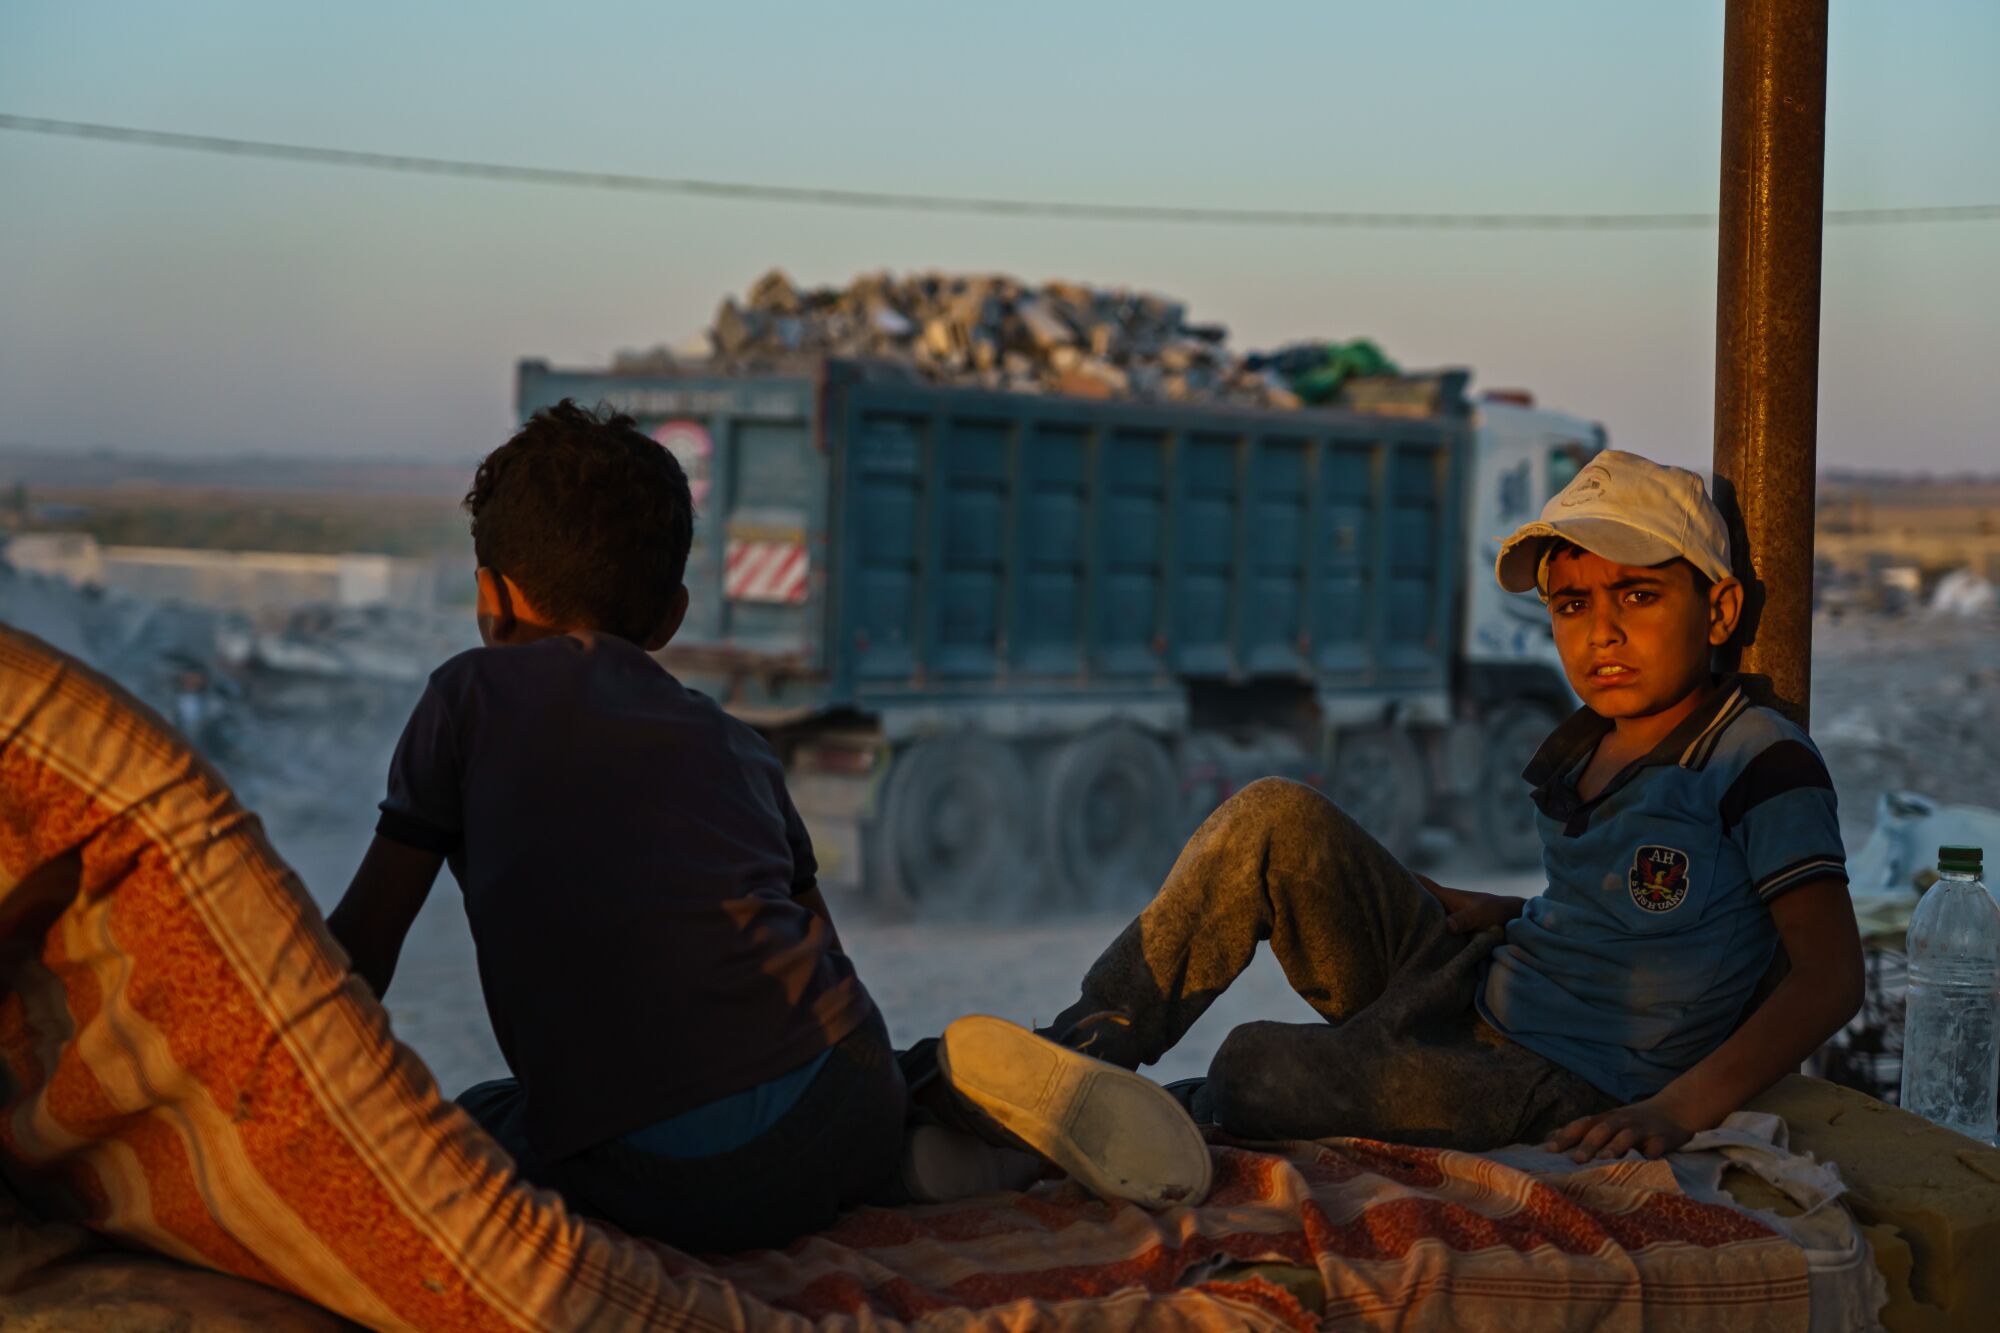  Children who work as laborers sit and rest as a truck brings in debris.    